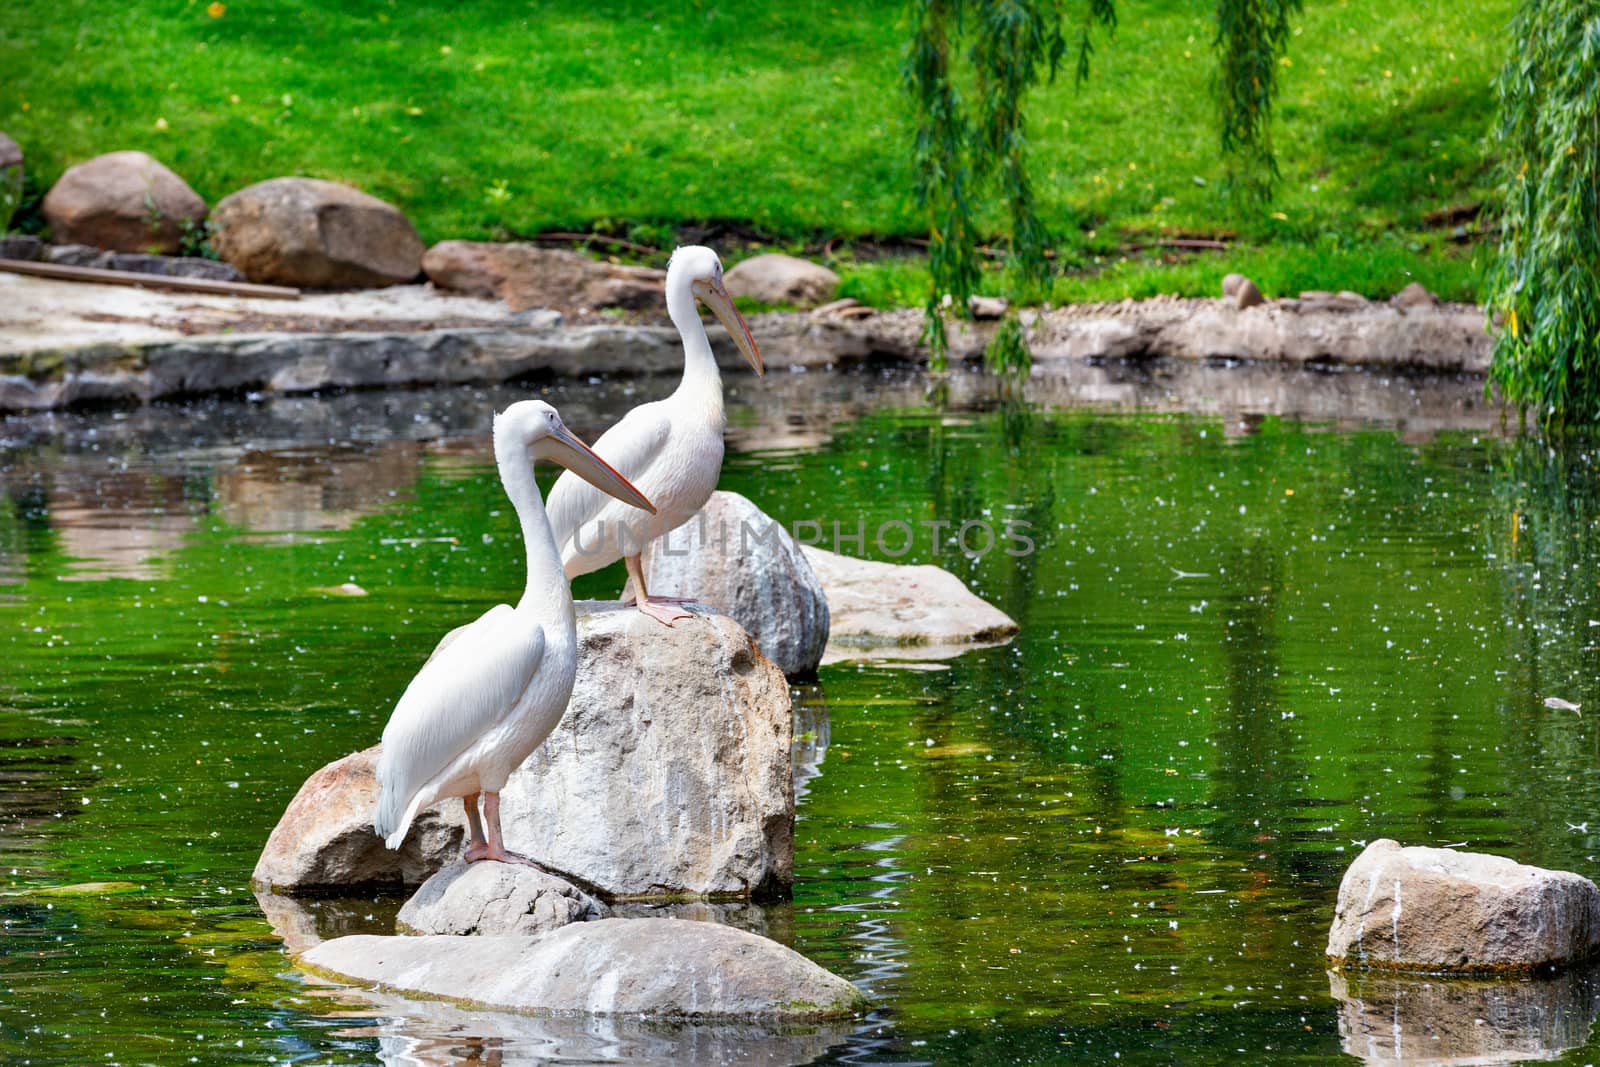 A pair of large white pelicans graceful rest on stone boulders in the middle of a forest lake surrounded by blurred water surface reflections, selective focus.